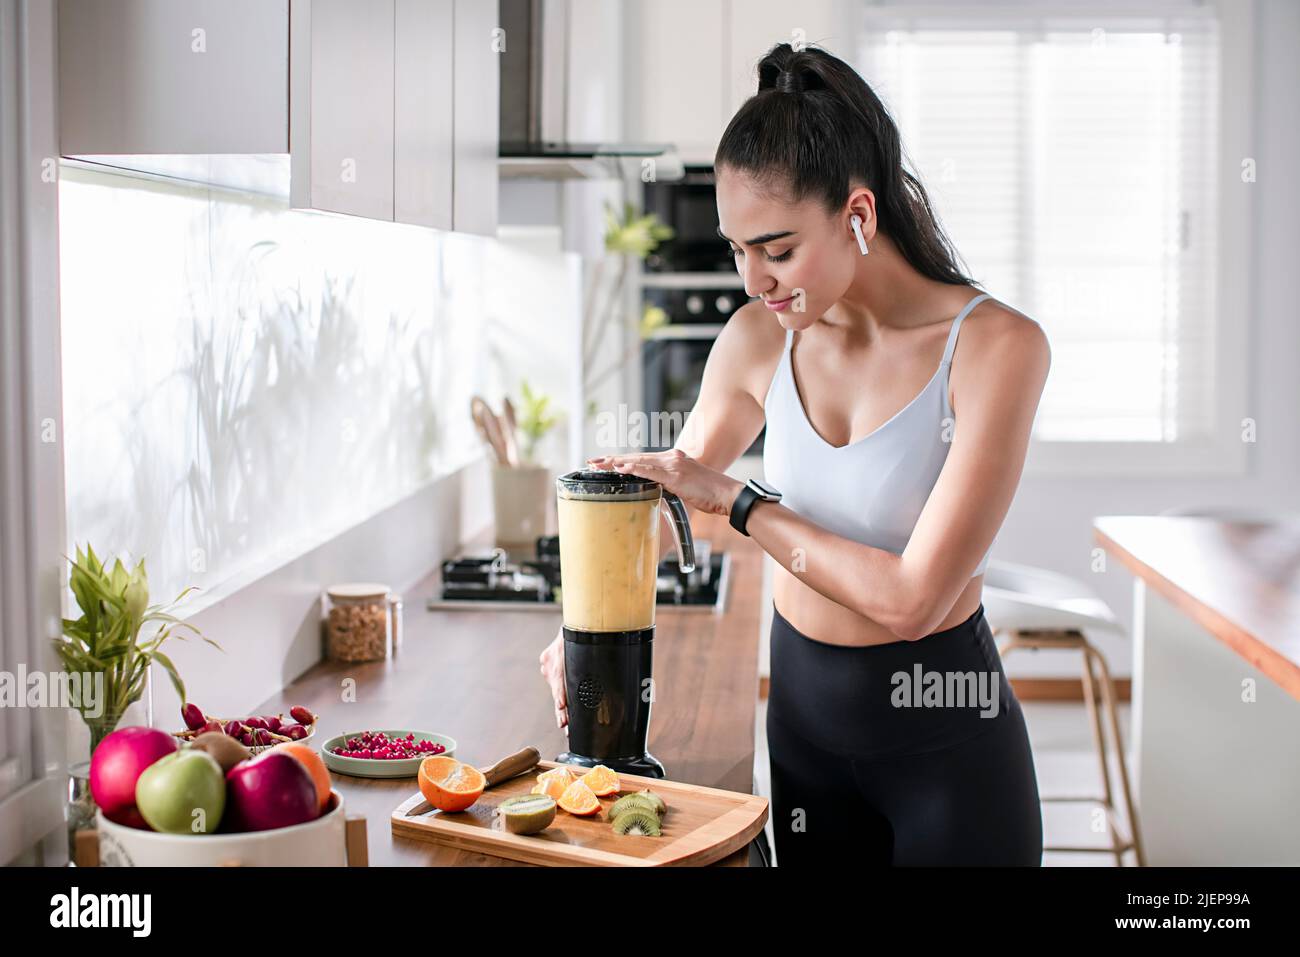 Young woman making milkshake in the kitchen Stock Photo